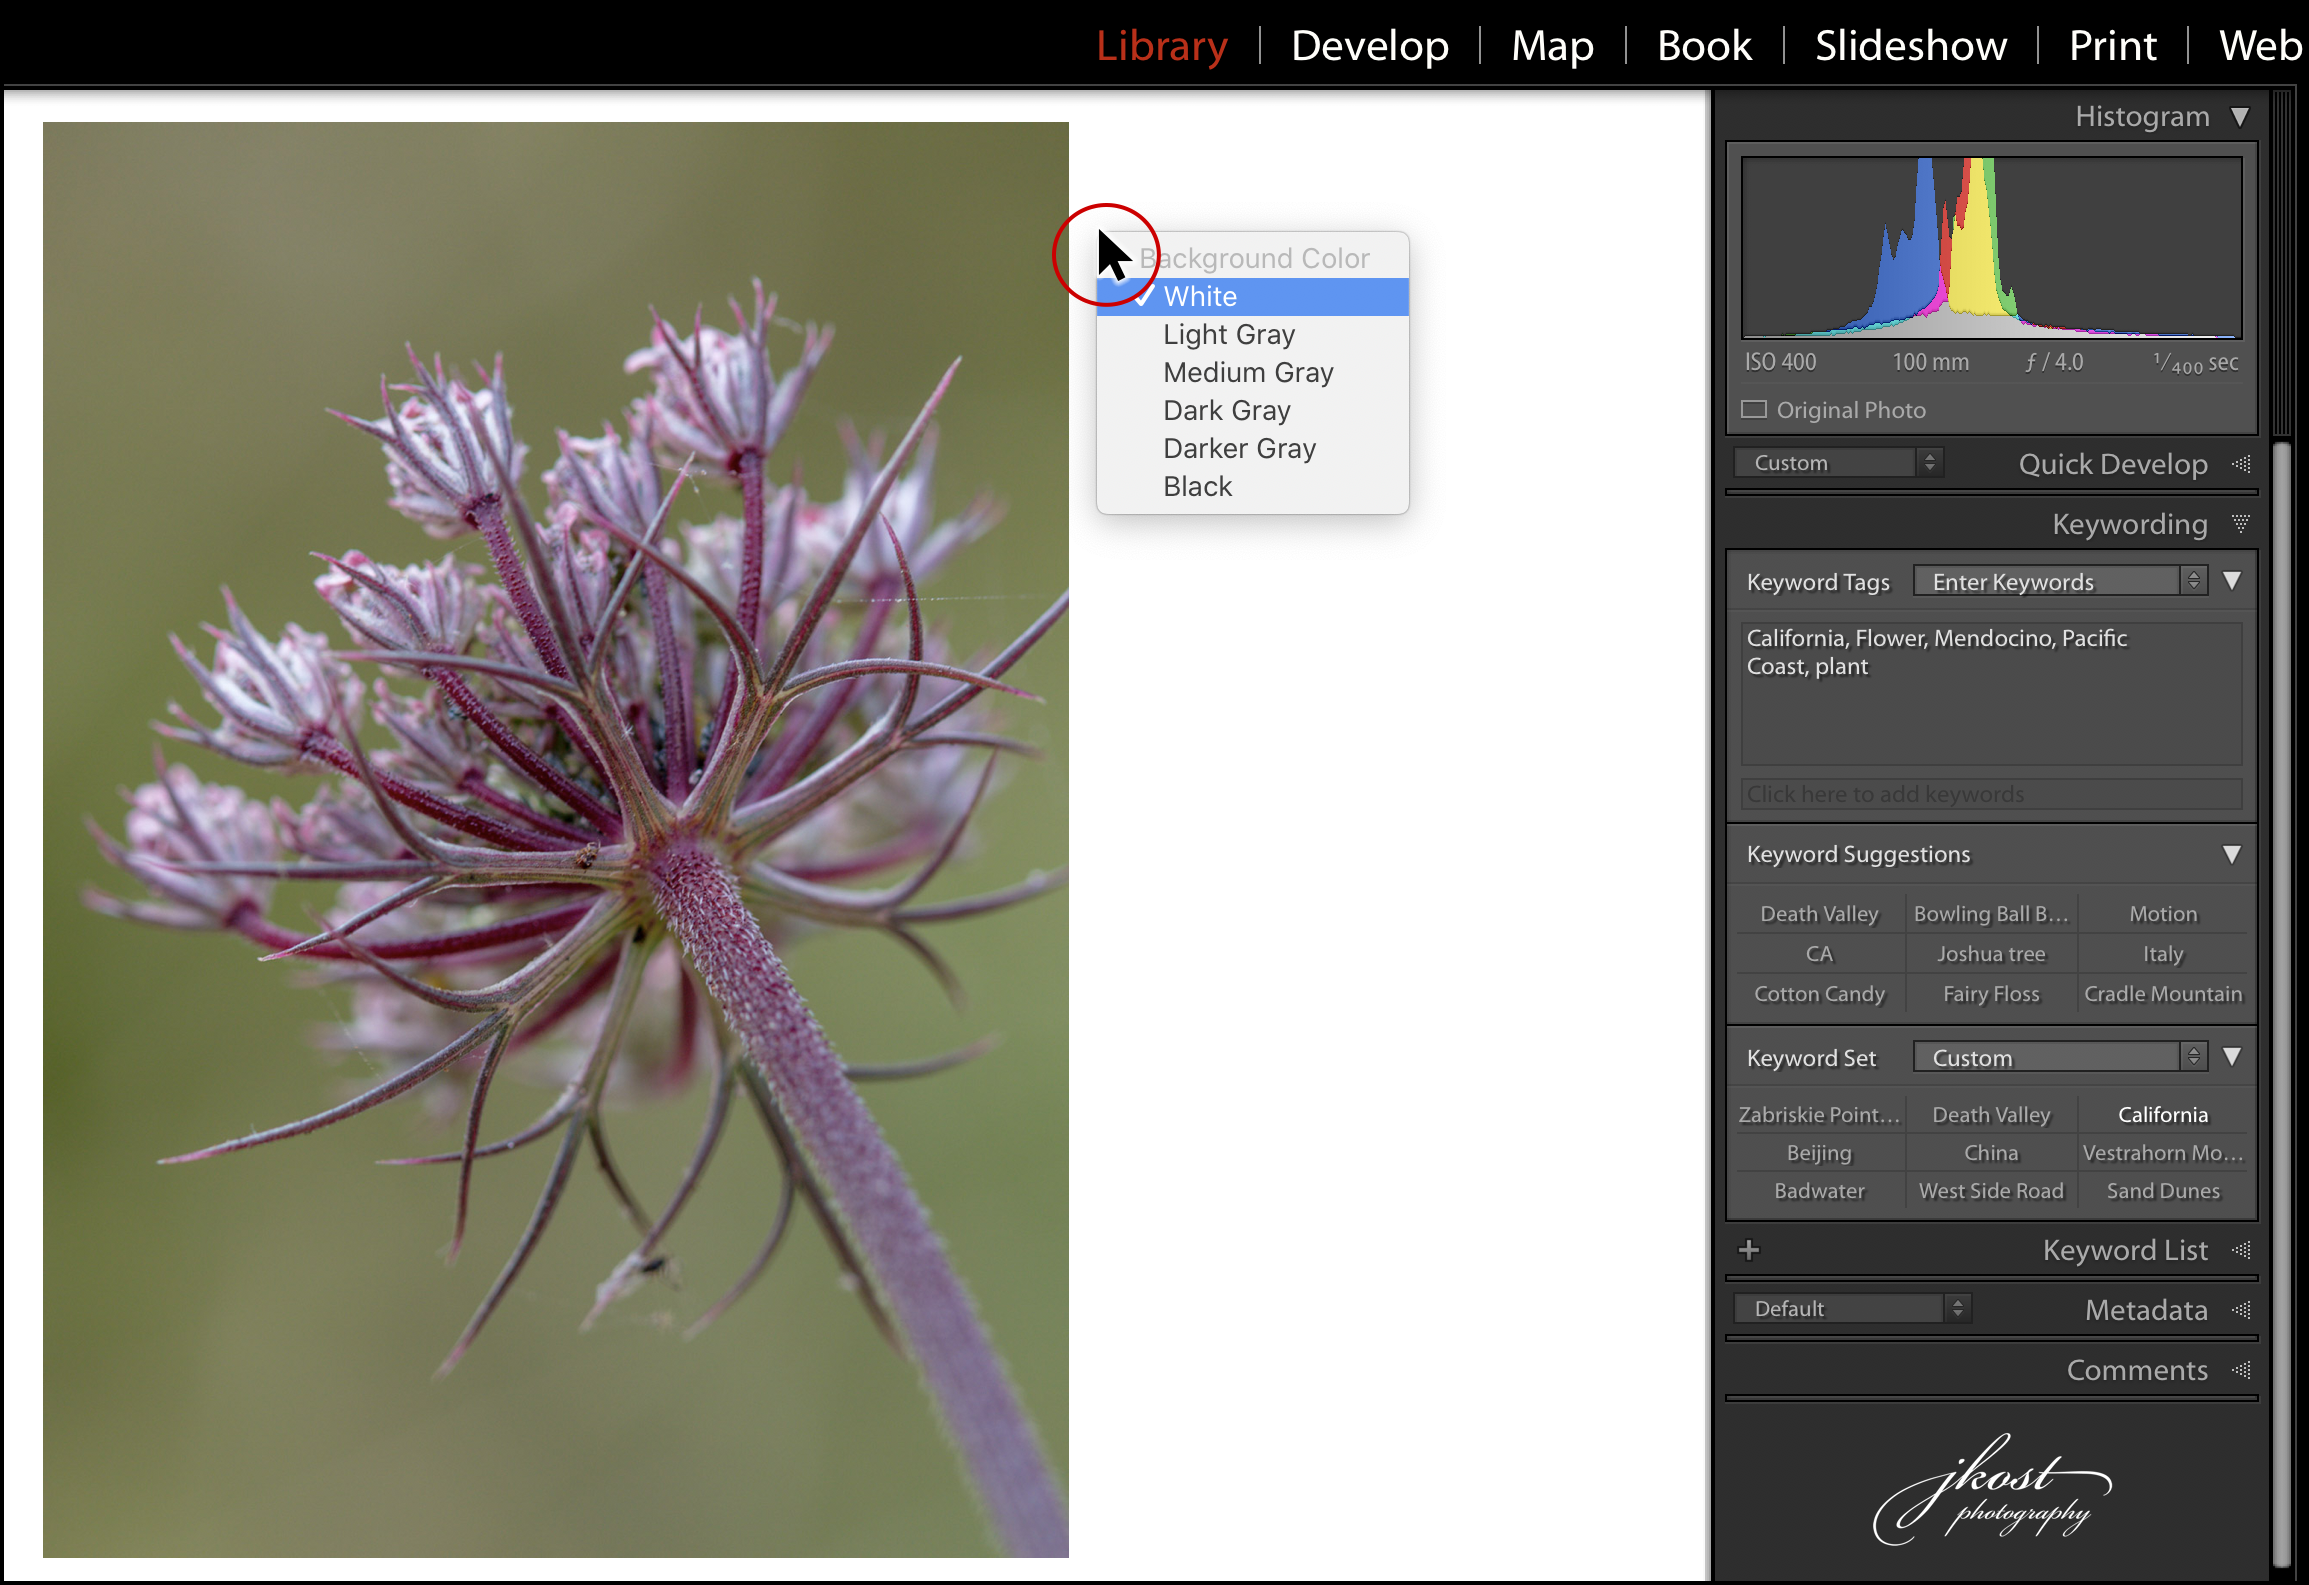 Julieanne Kost's Blog | Customizing View Options in Lightroom Classic